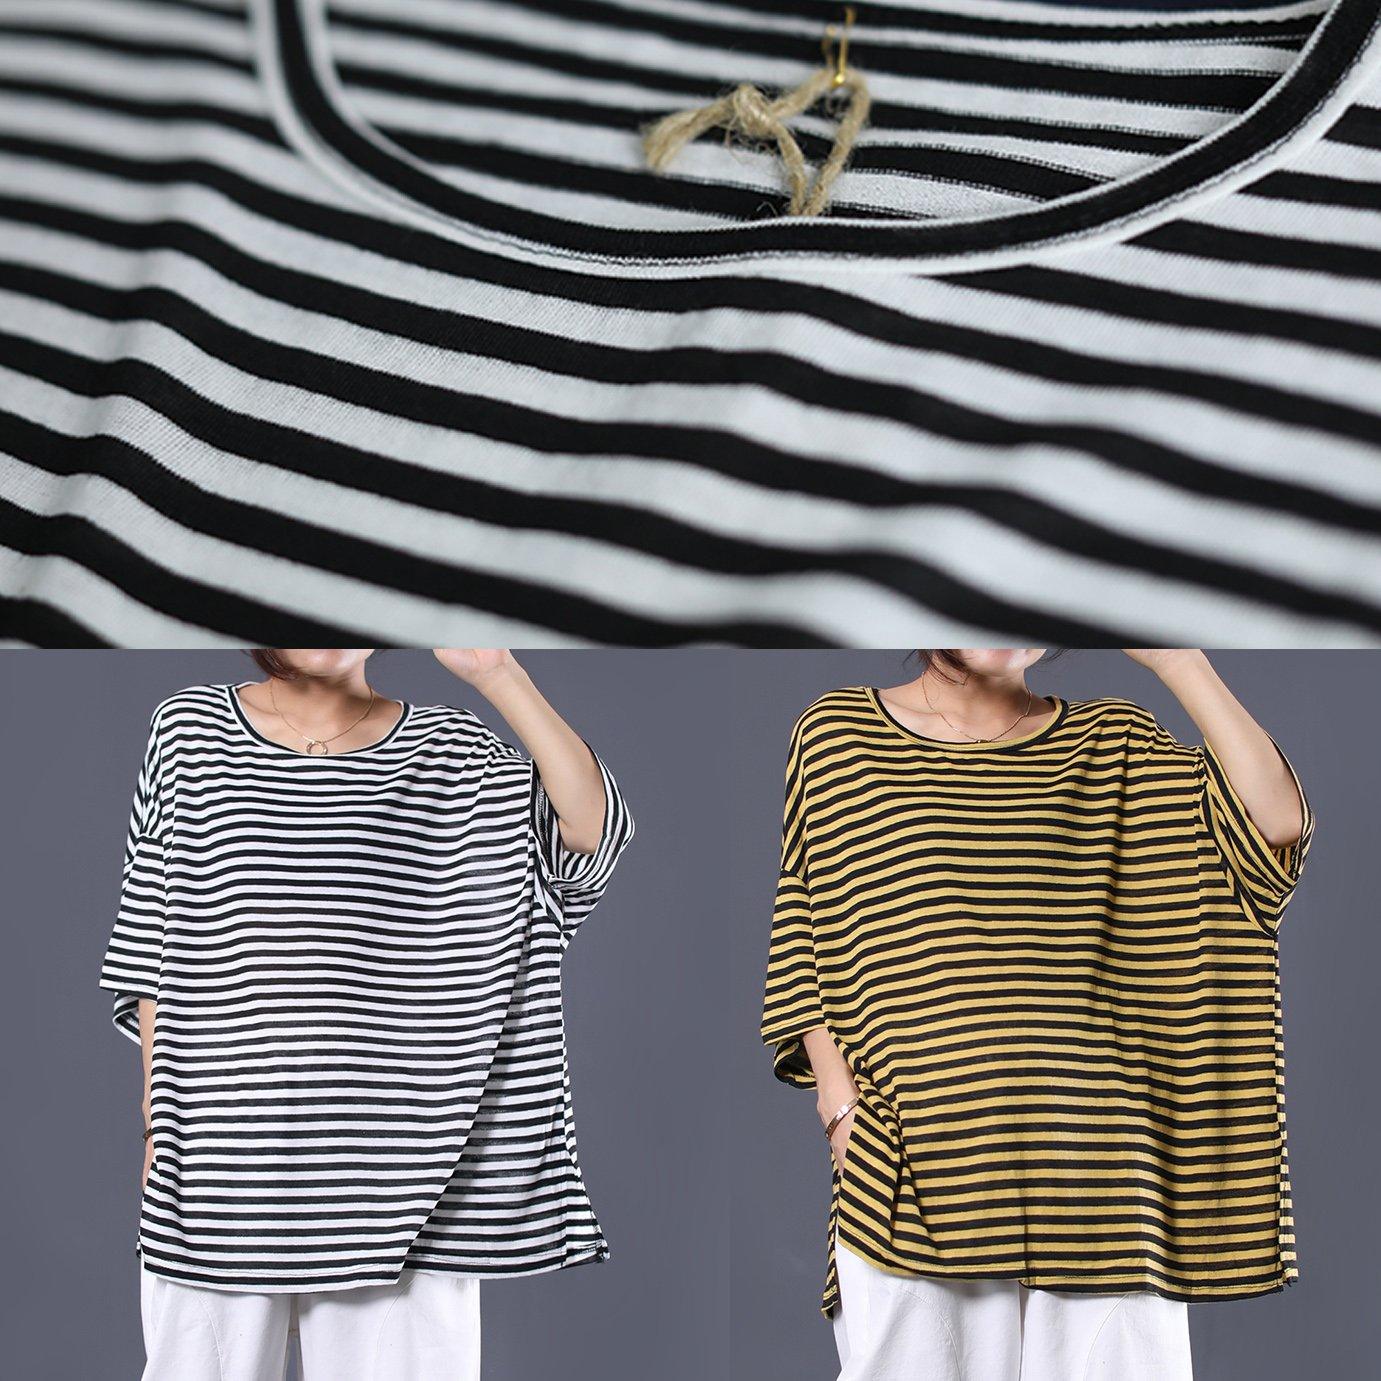 Loose side open cotton clothes For Women Work black striped blouse summer - Omychic